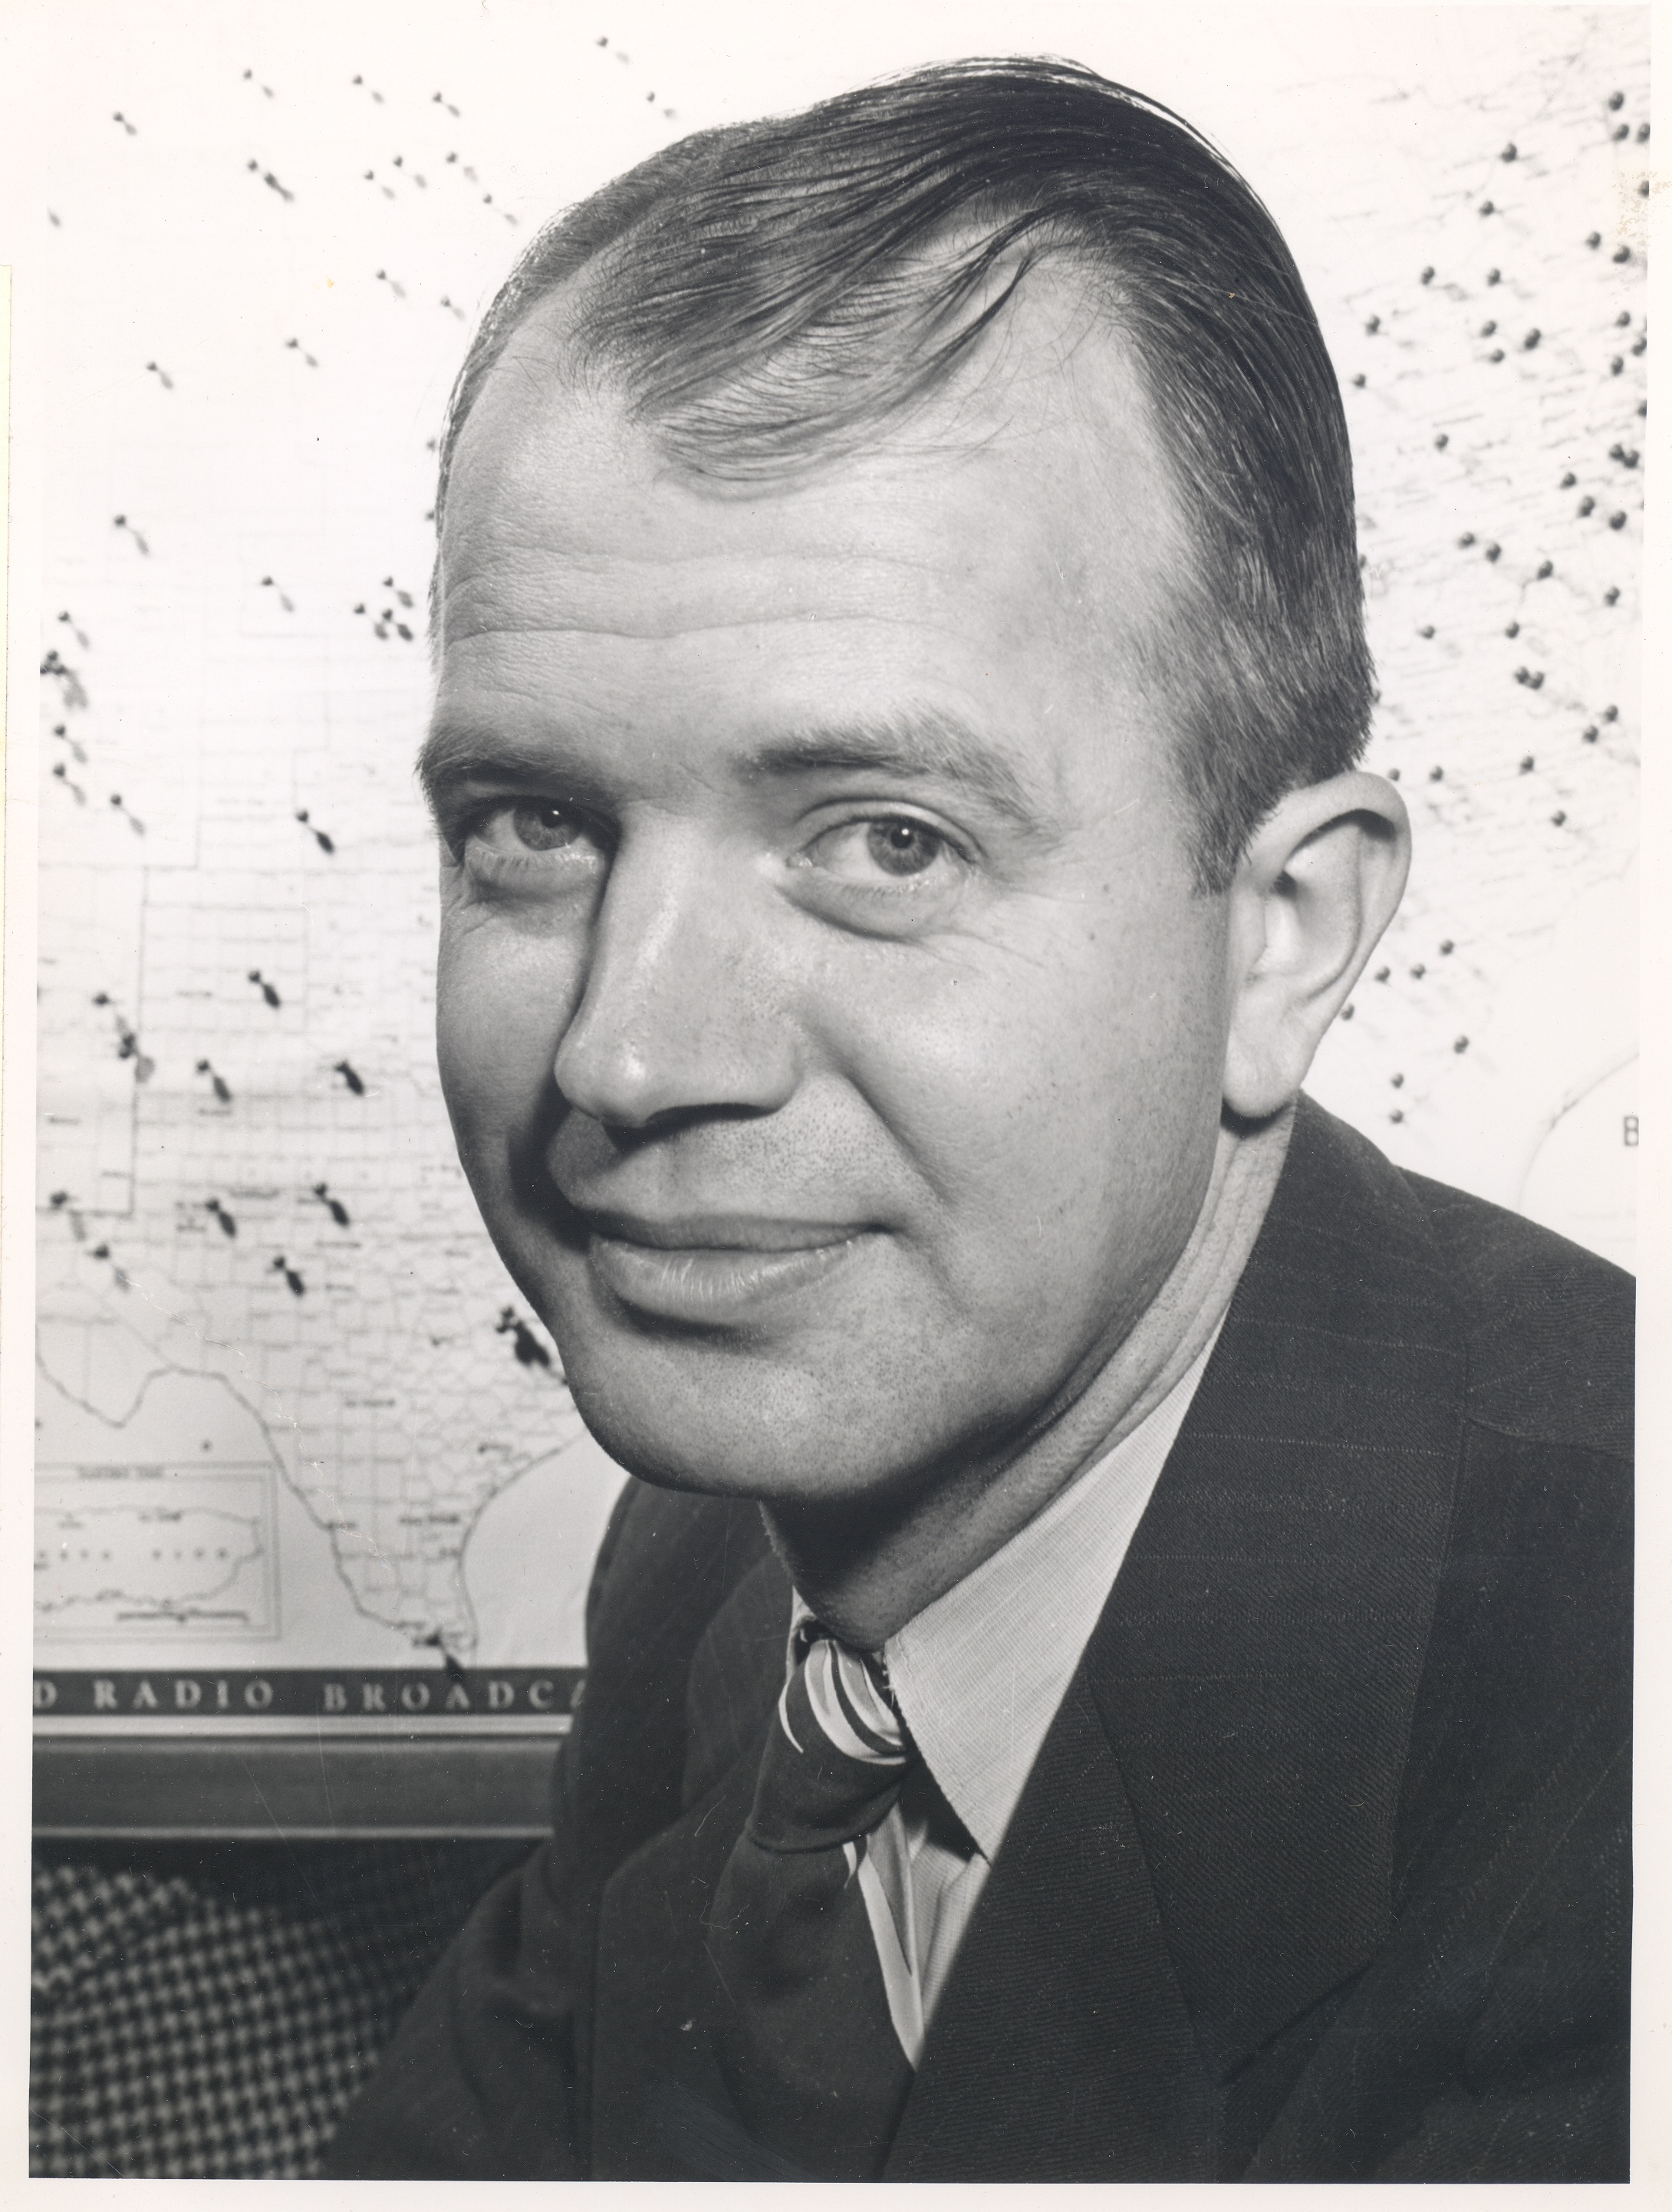 Farm Broadcaster John Baker photographed in 1945. Baker was the author